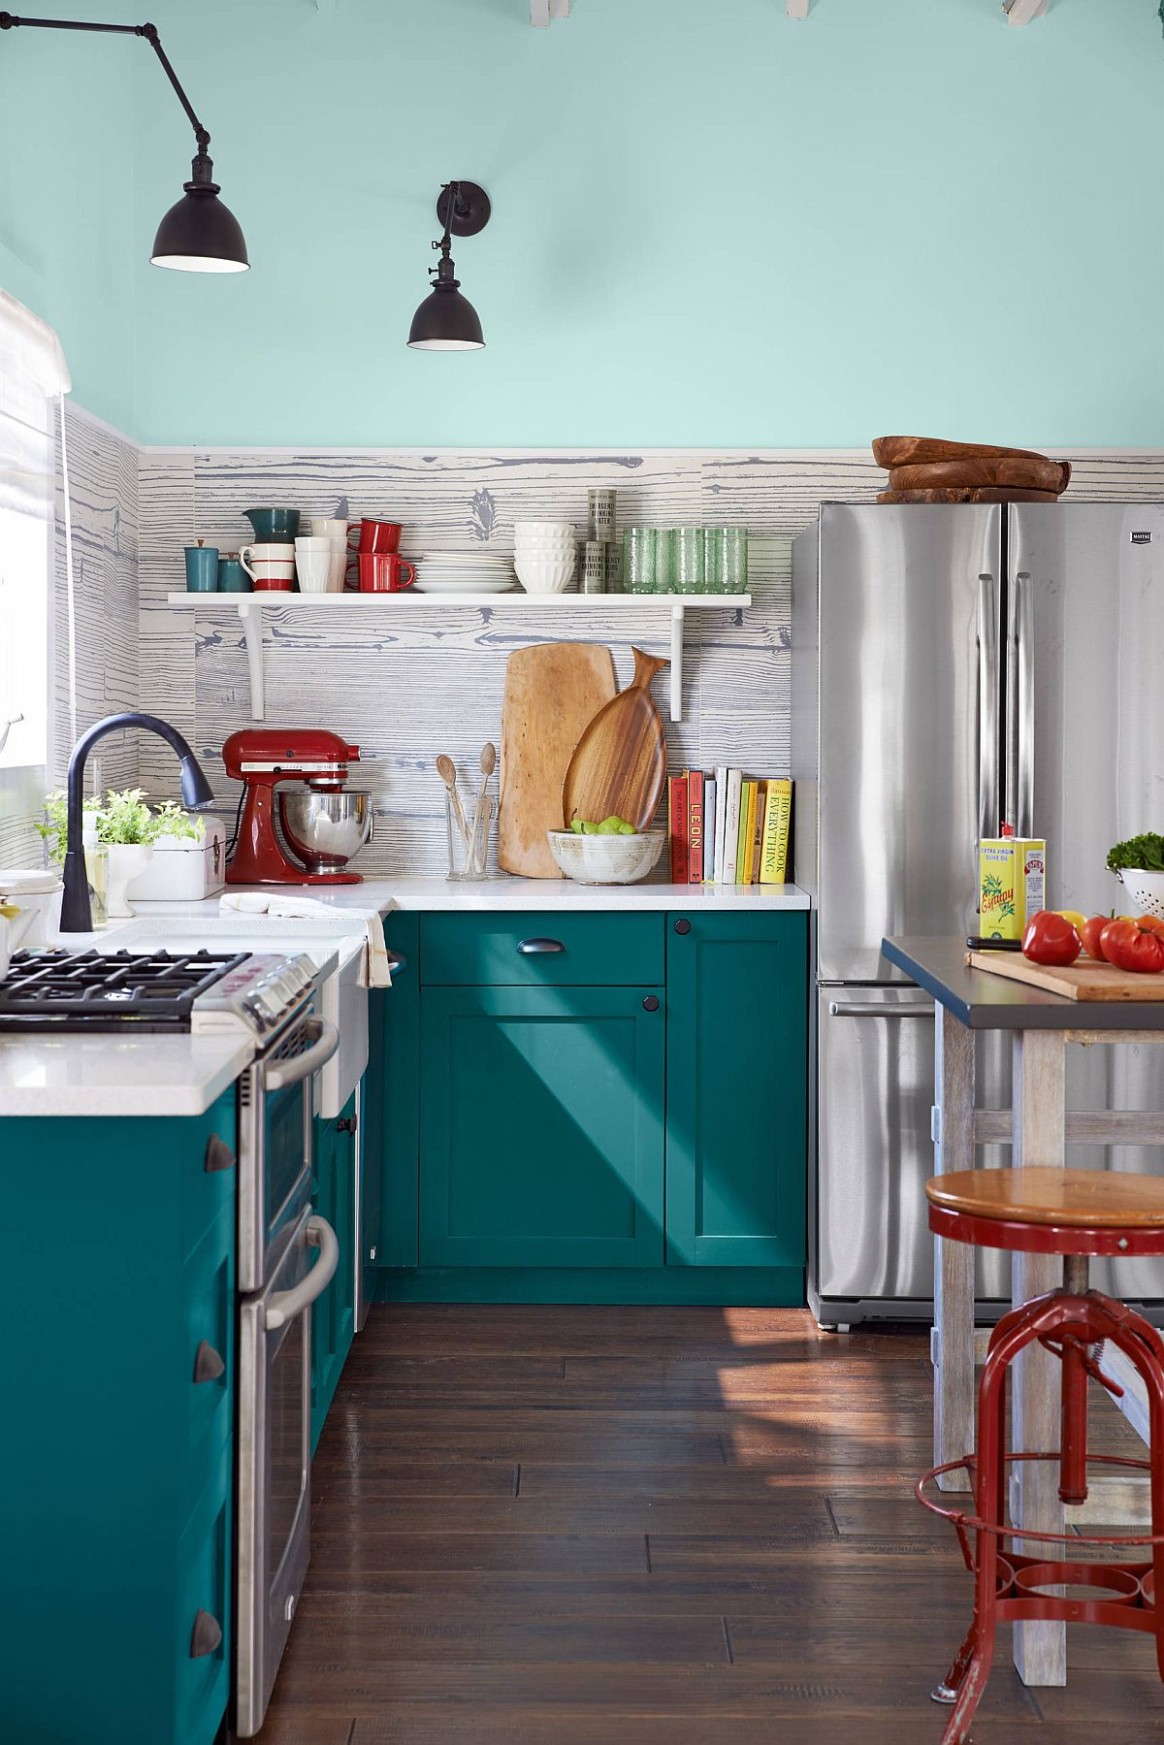 3 Best Small Kitchens from New York City that Inspire with Creativity - kitchen cabinets new york city